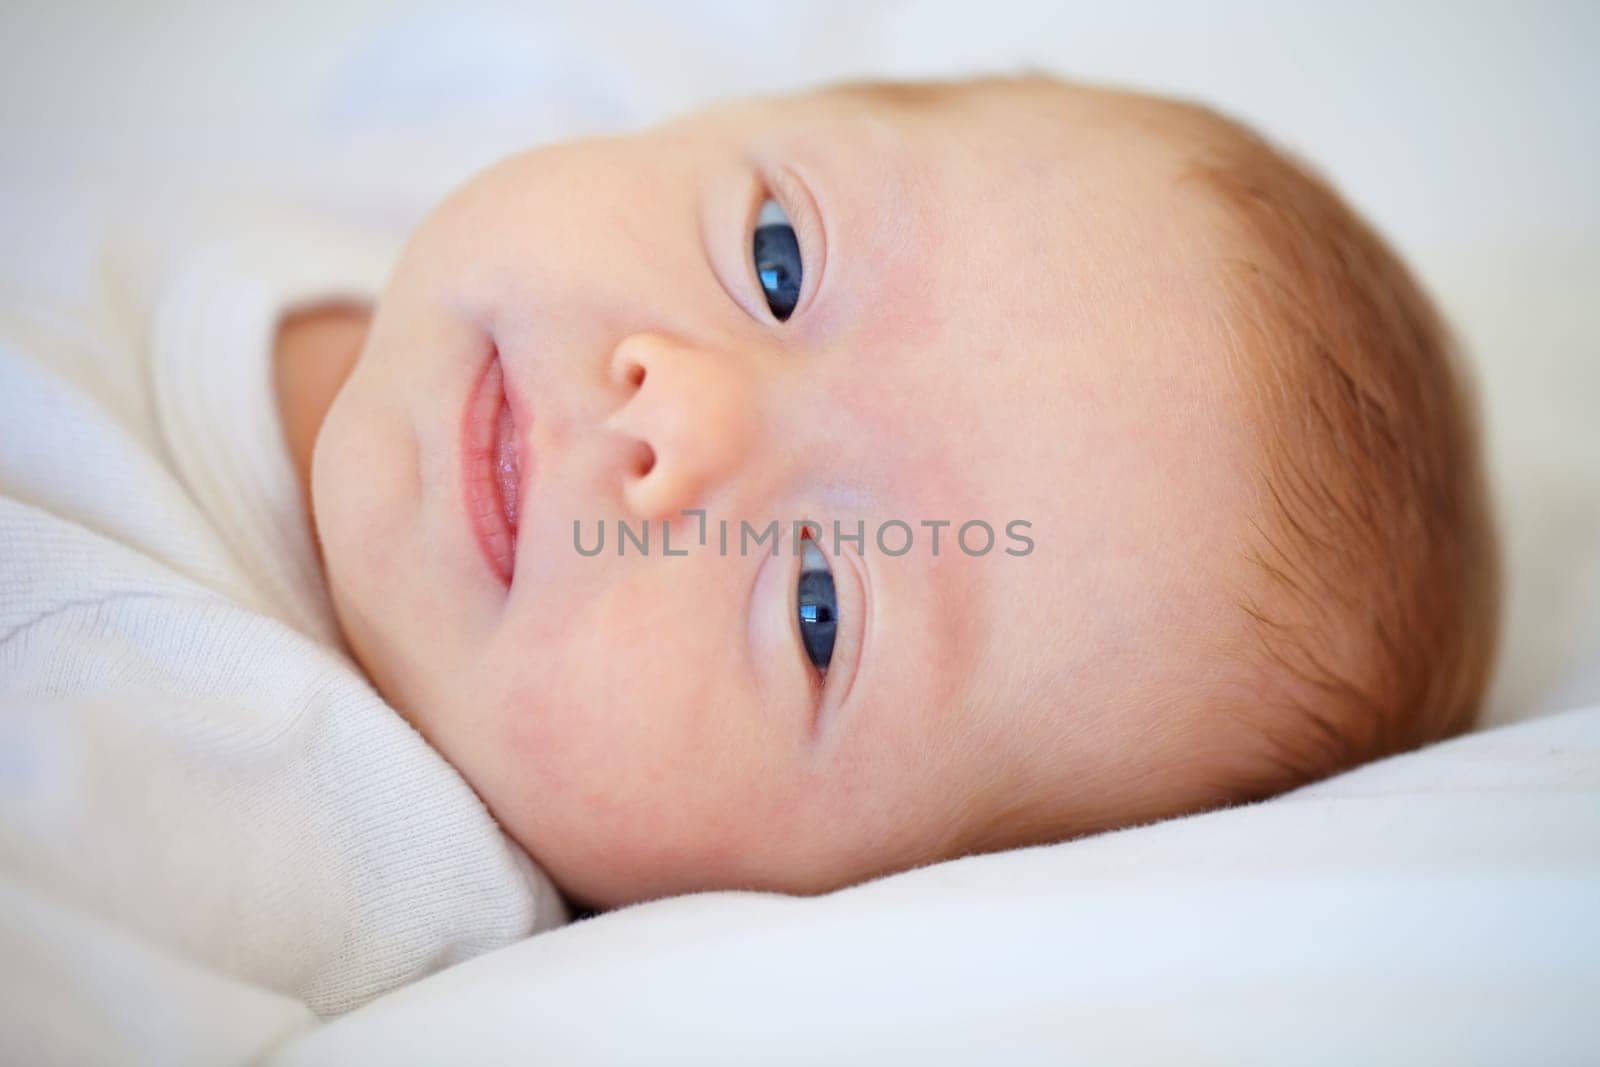 Closeup, portrait and baby for wake up in bedroom for sleep, relax or peaceful in morning. Infant, happy or good dream from nap with calm, care or hope for child growth, cognitive and development.